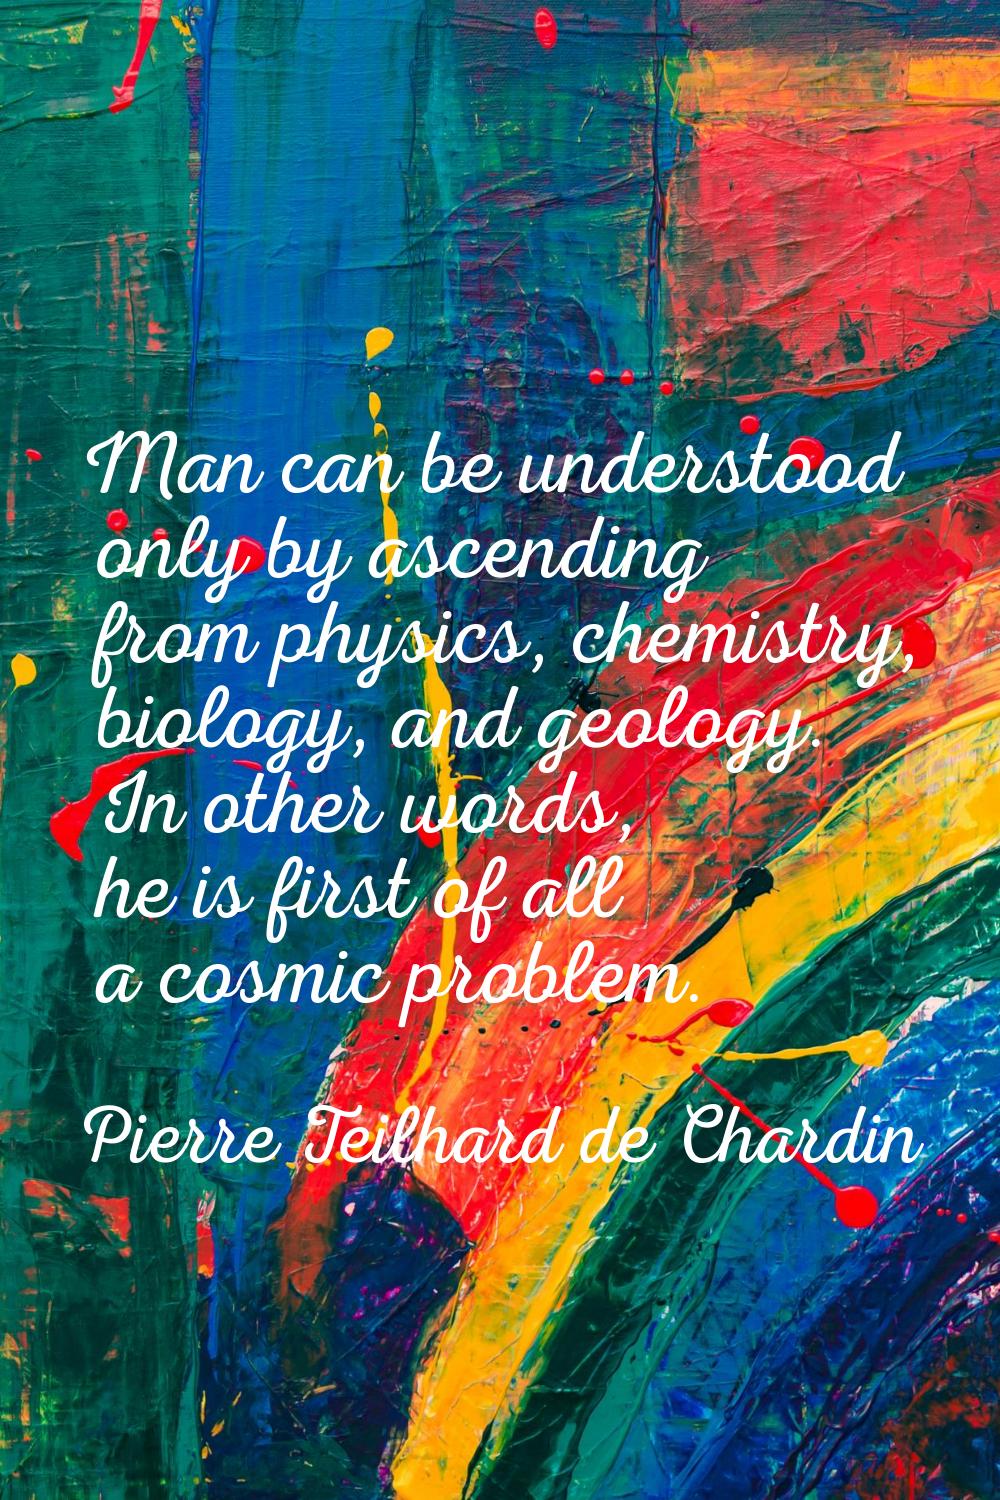 Man can be understood only by ascending from physics, chemistry, biology, and geology. In other wor